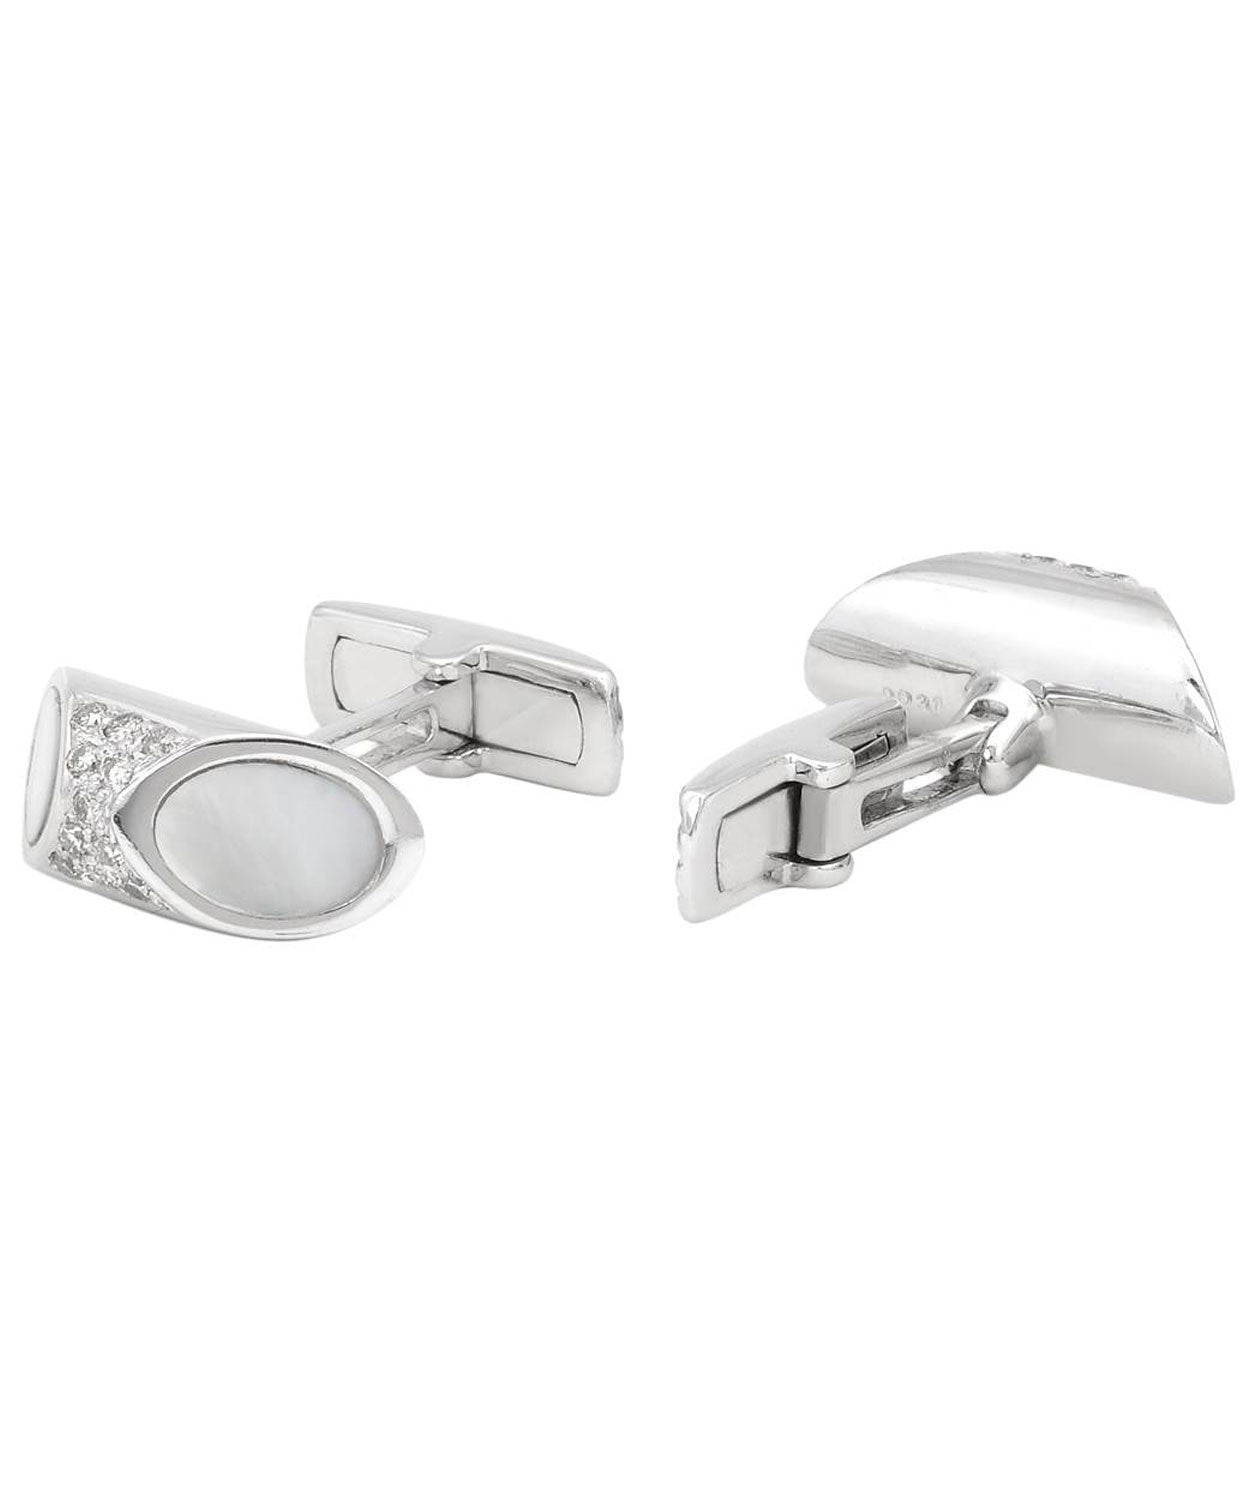 Dapper Man Collection 0.33 ctw Diamond 14k White Gold Classic Cuff Links - With Mother Of Pearl Inlay View 2